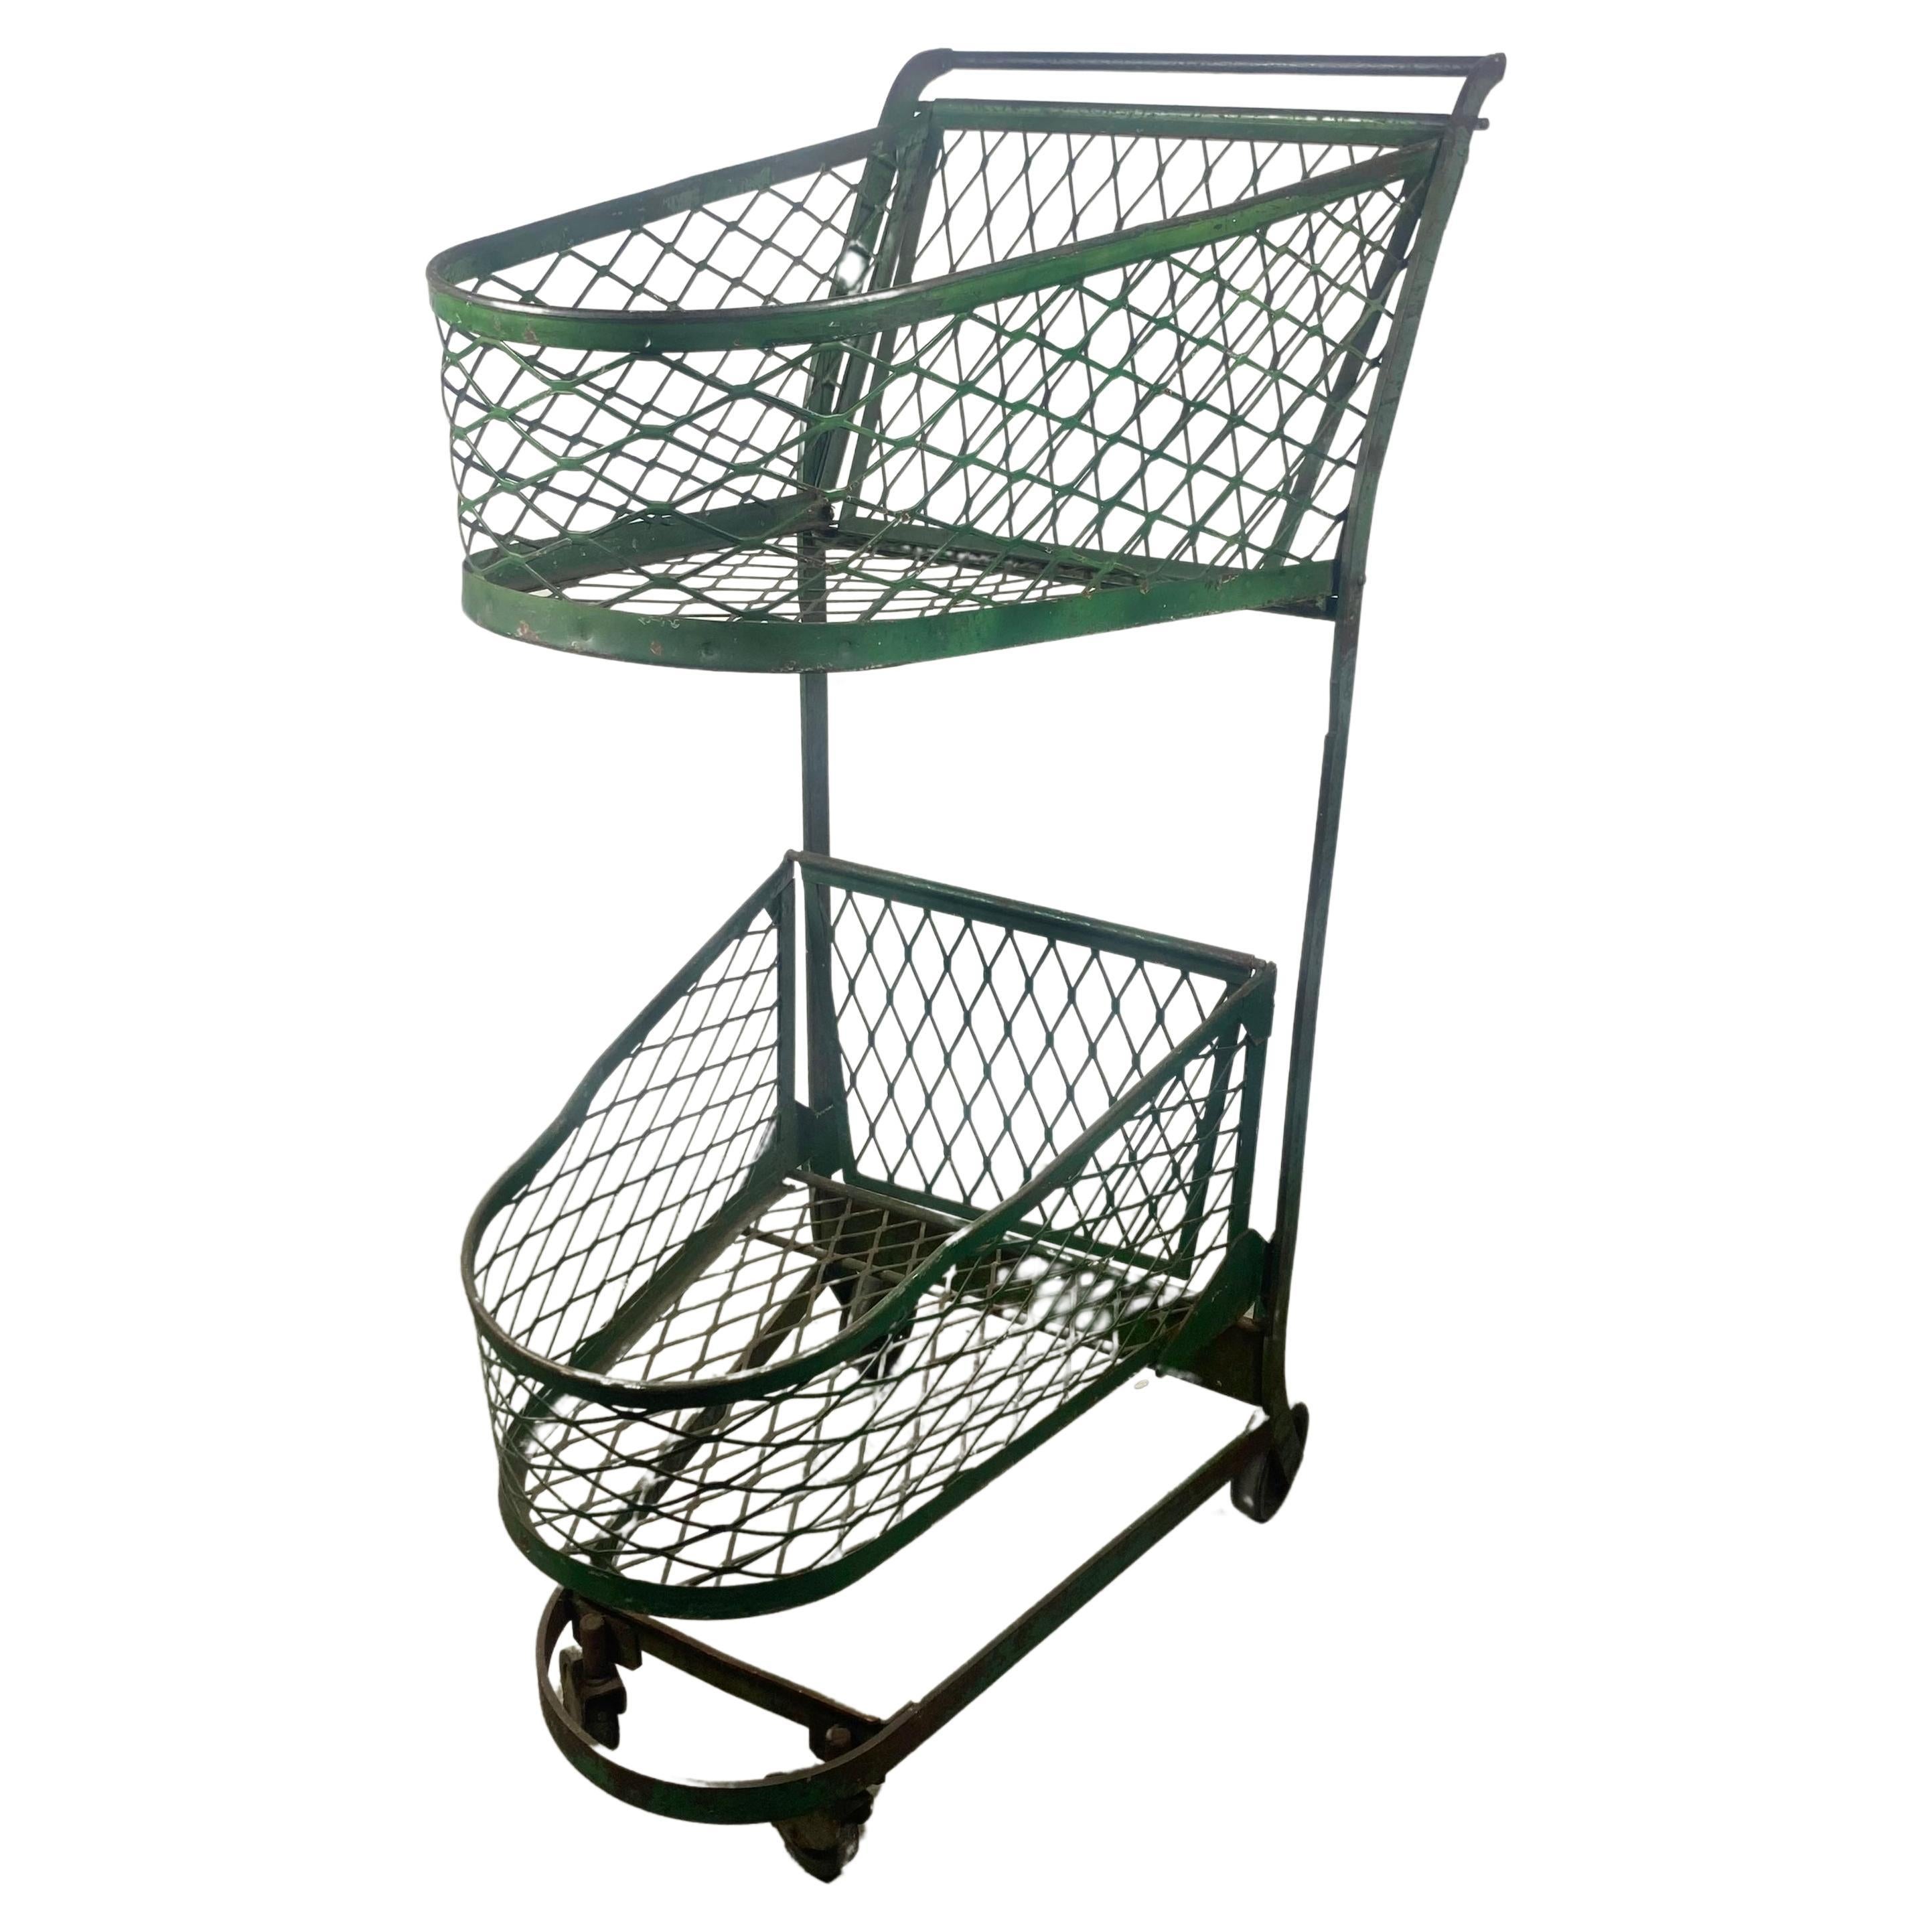 Unusual Industrial Shopping Cart by Orla Watson , Telescope Cart Inc. For Sale